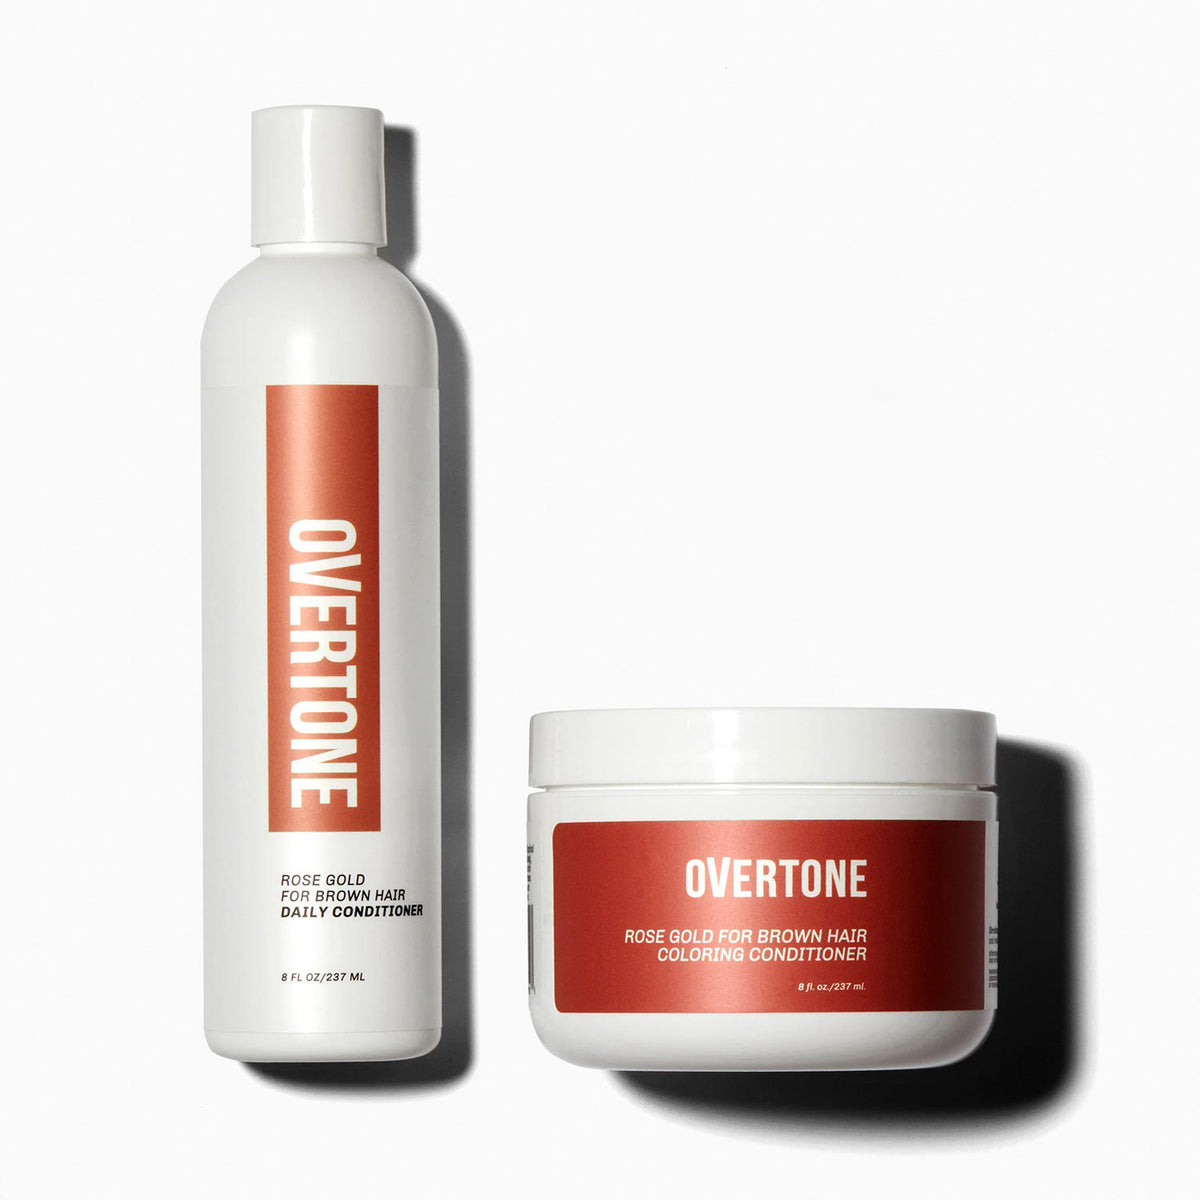 oVertone Rose Gold for Brown Hair Coloring Conditioner and Daily Conditioner